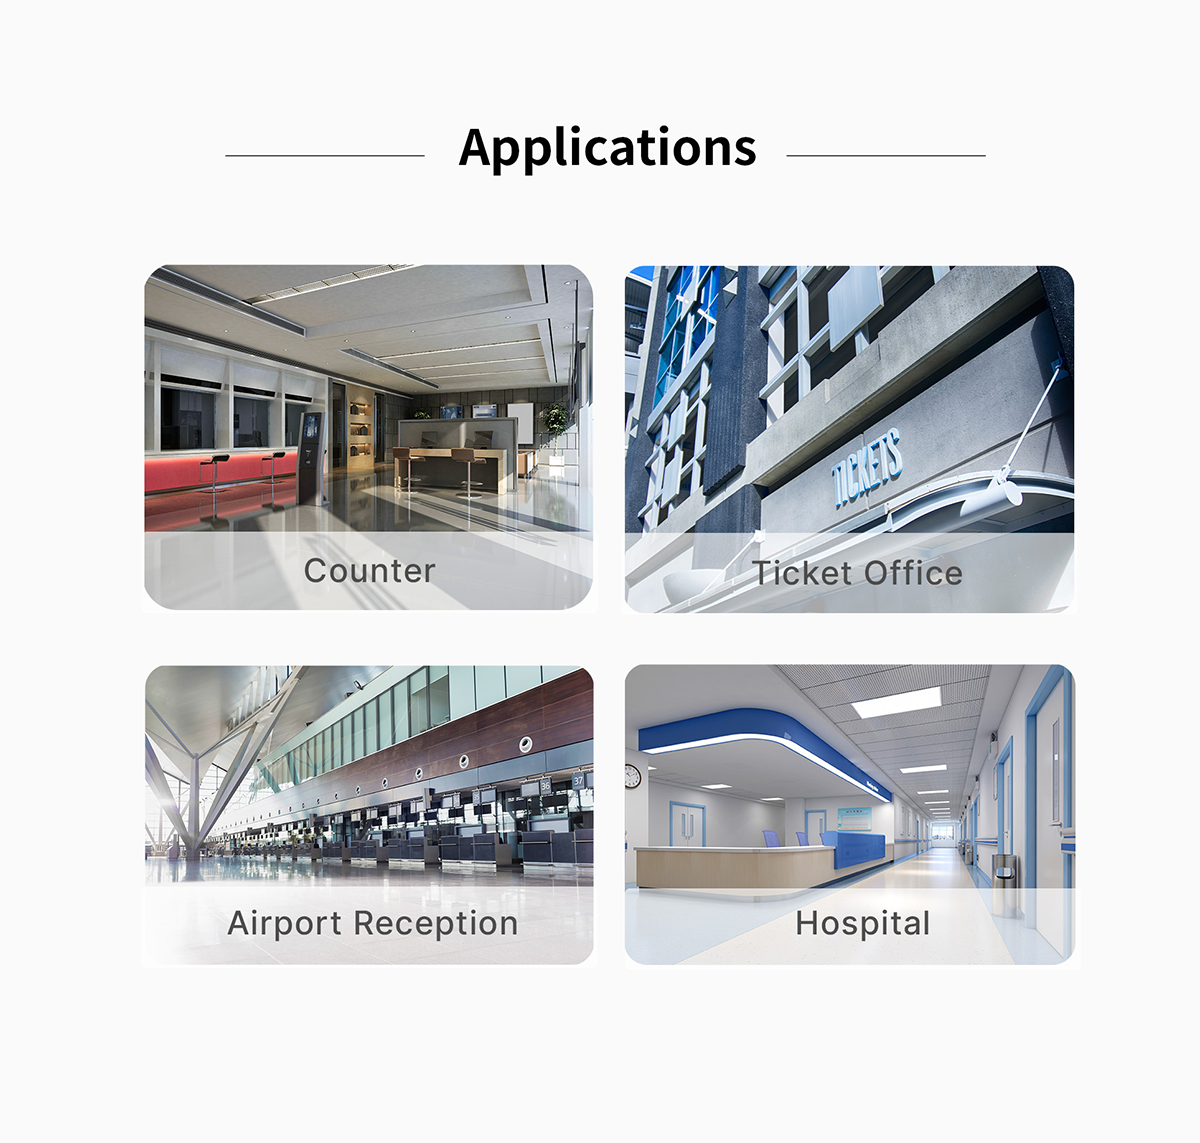  DSP For Clear Intercom   Single-Cable Connection  Noise Suppression, AGC   One-Touch Scene Modes  Web-base management Via Ethernet  Tri-party Communication Capability. APPLICATIONS: counter, ticket office, airport reception, hospital